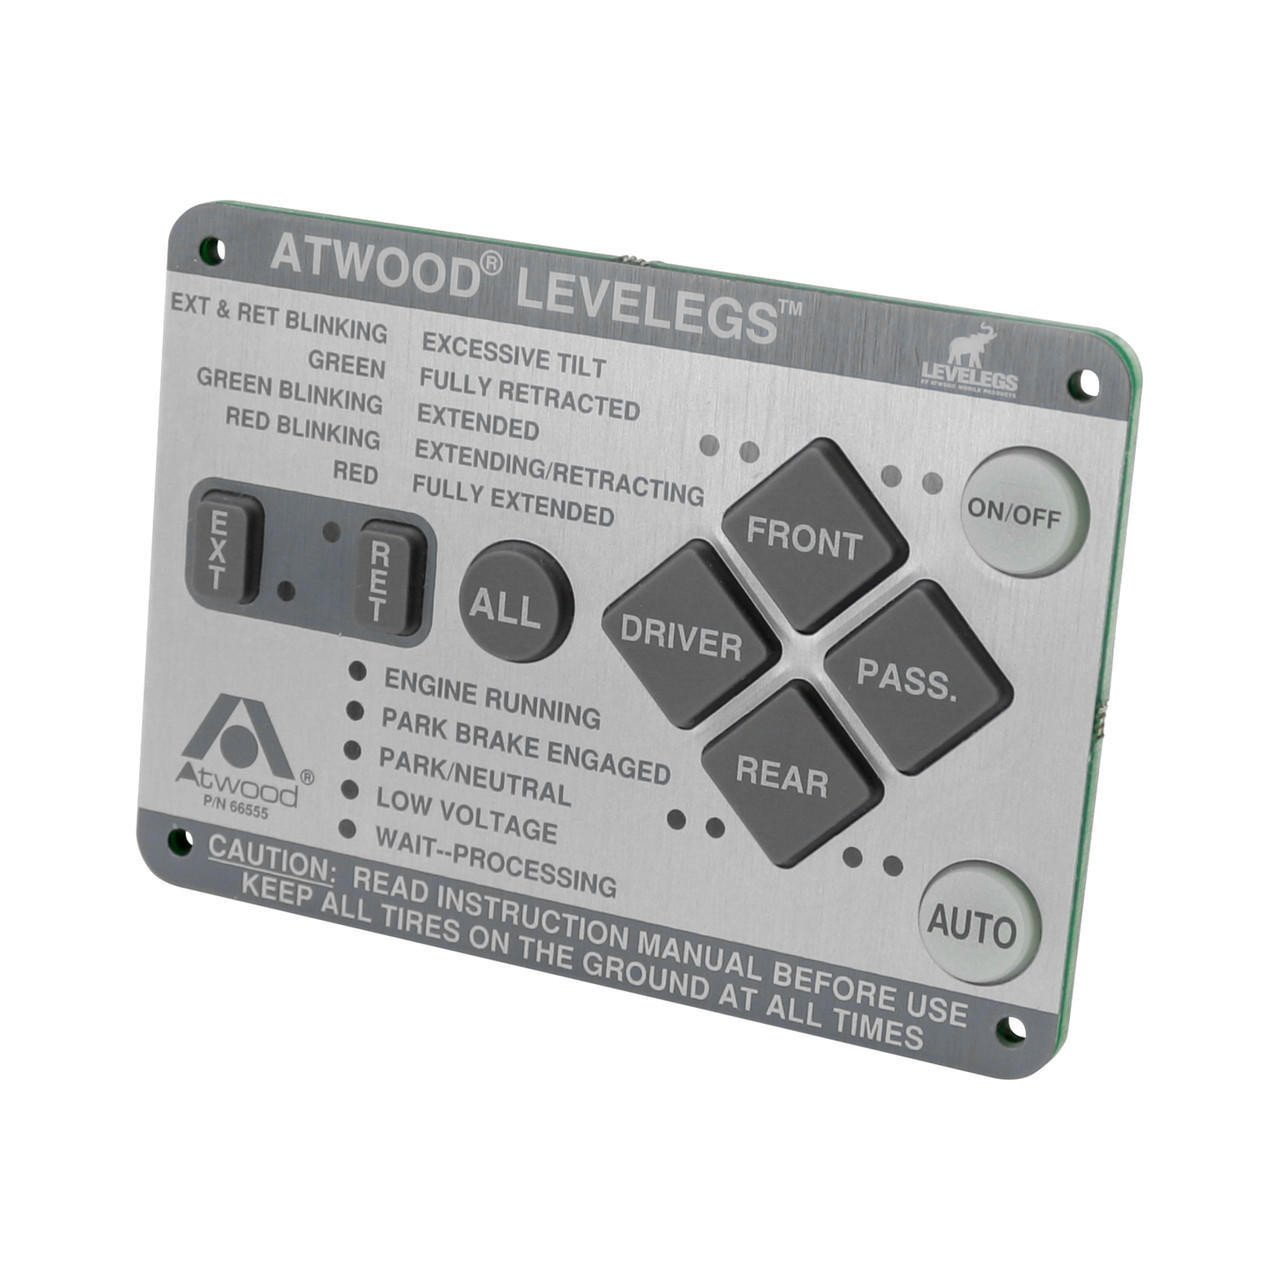  Atwood Level Legs Replacement 66555 Keypad Only 